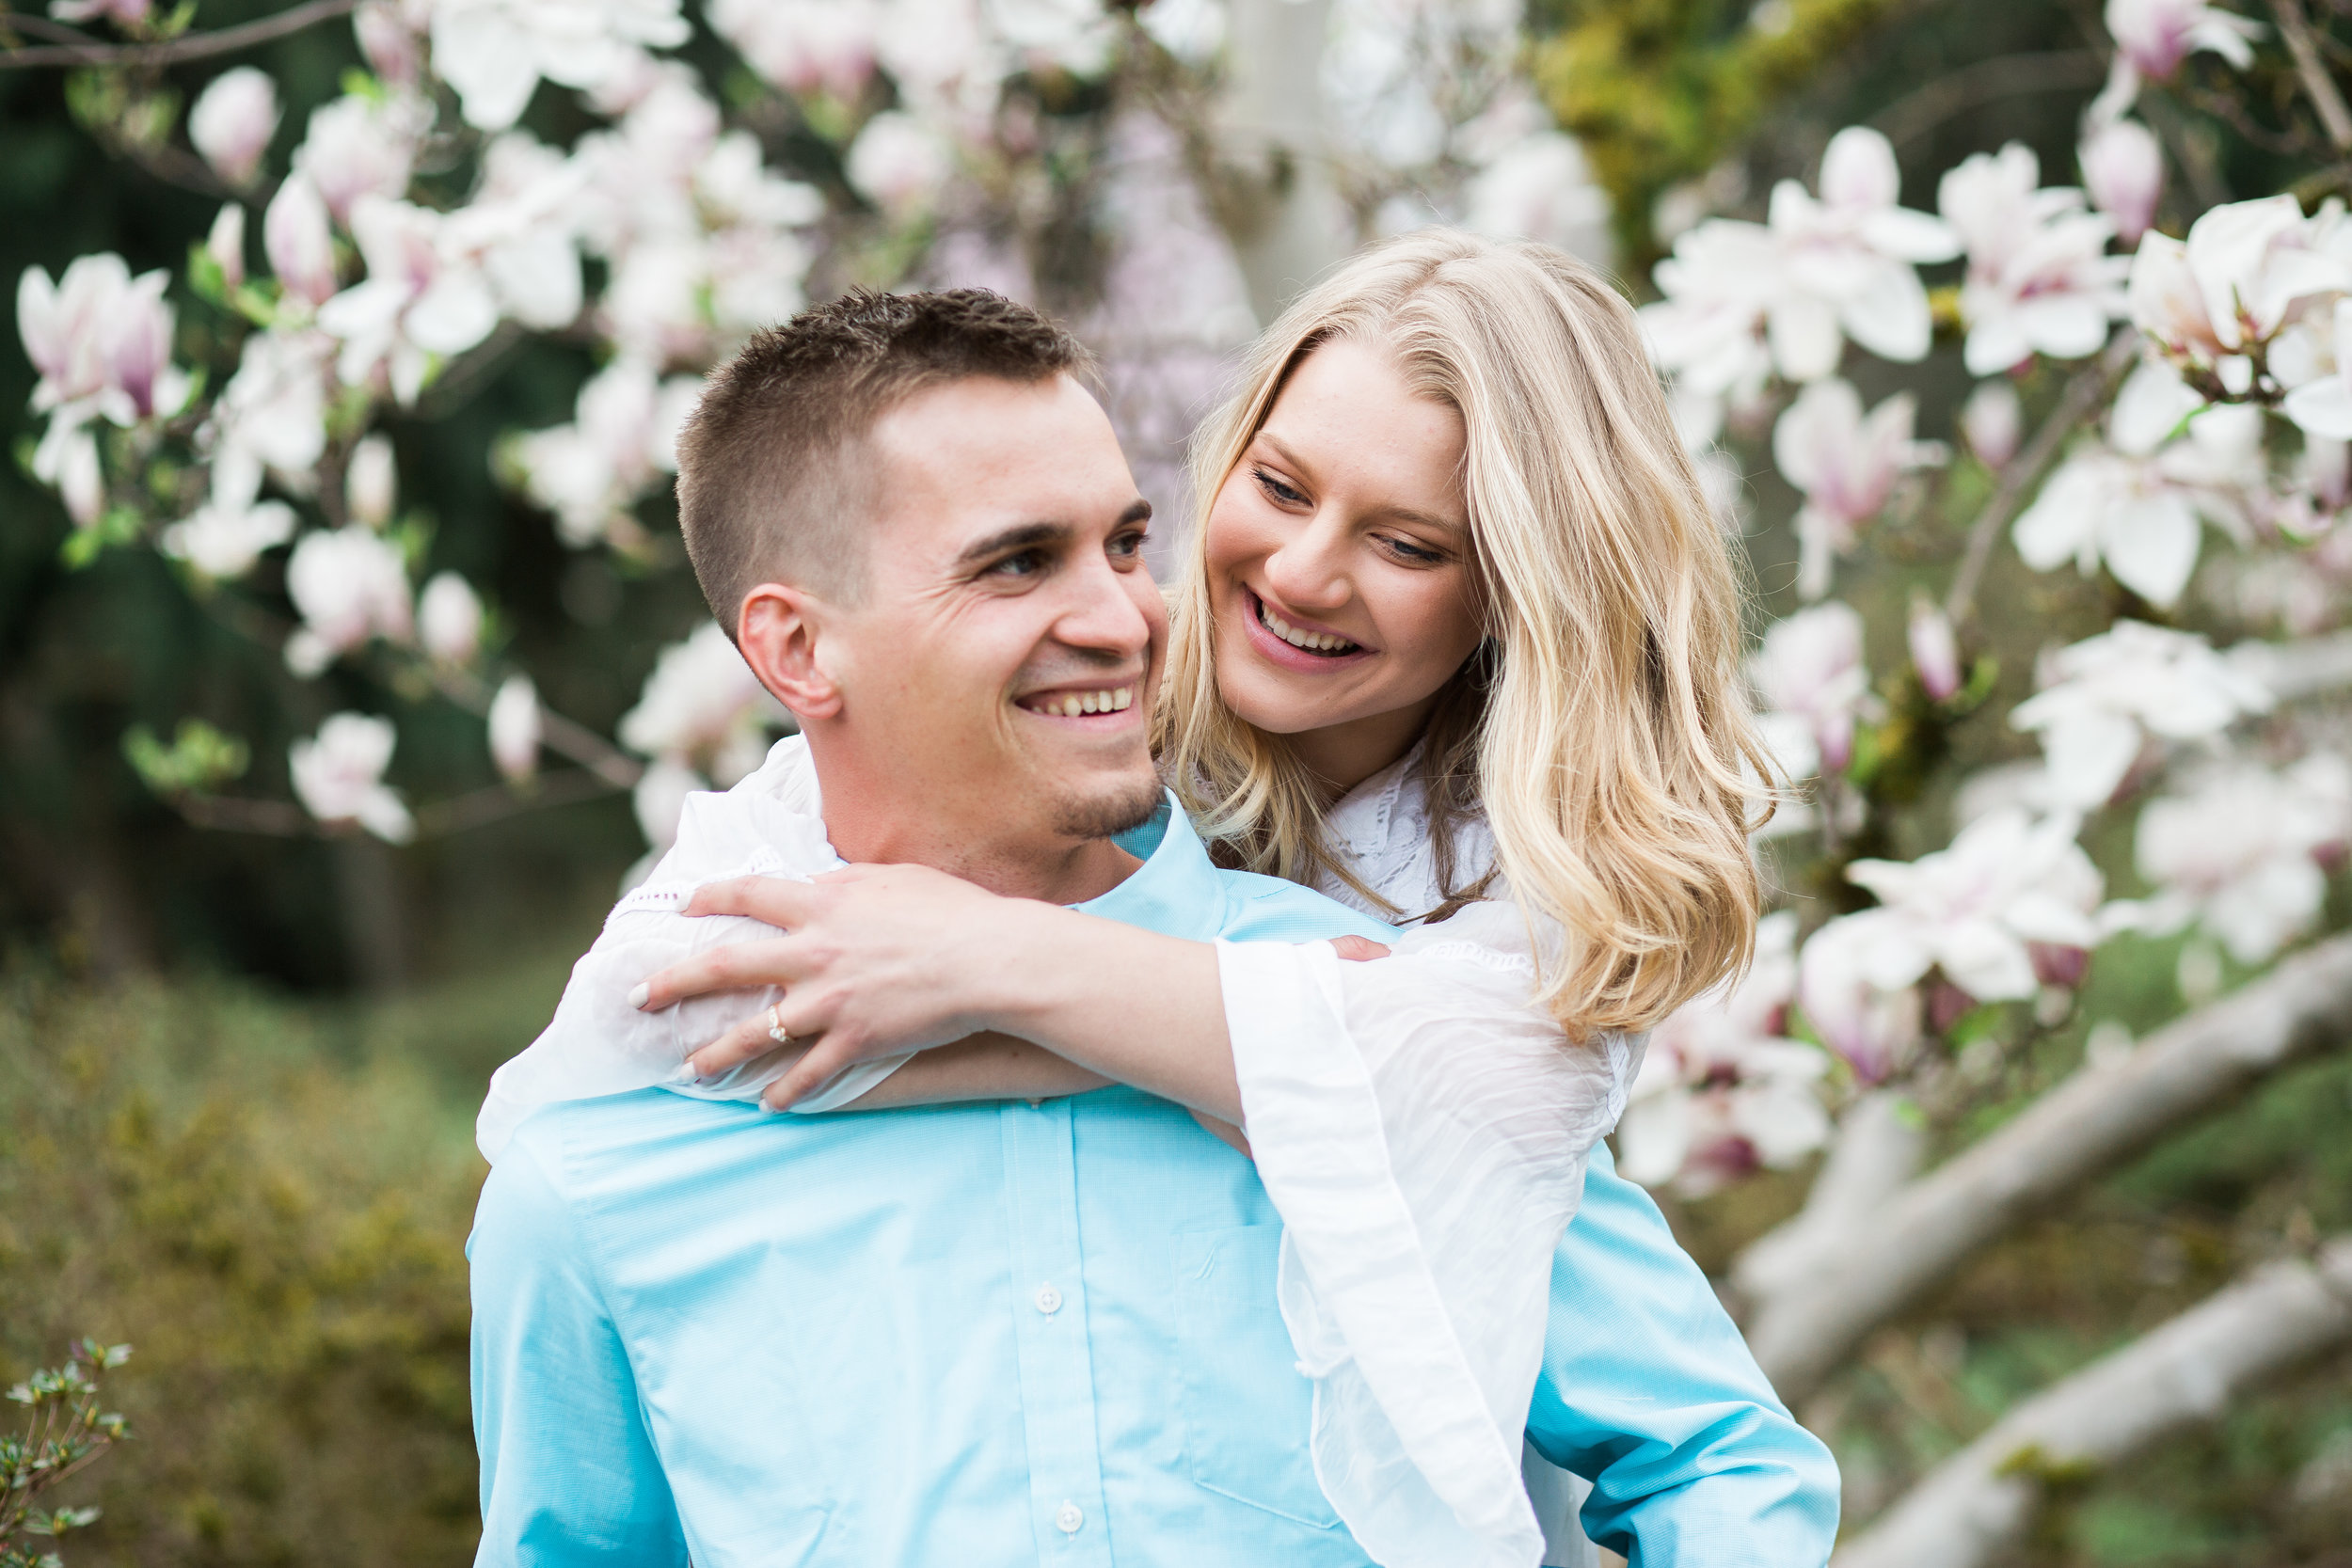 tricia and nate engagement photos-janelle elaine photography-167.jpg